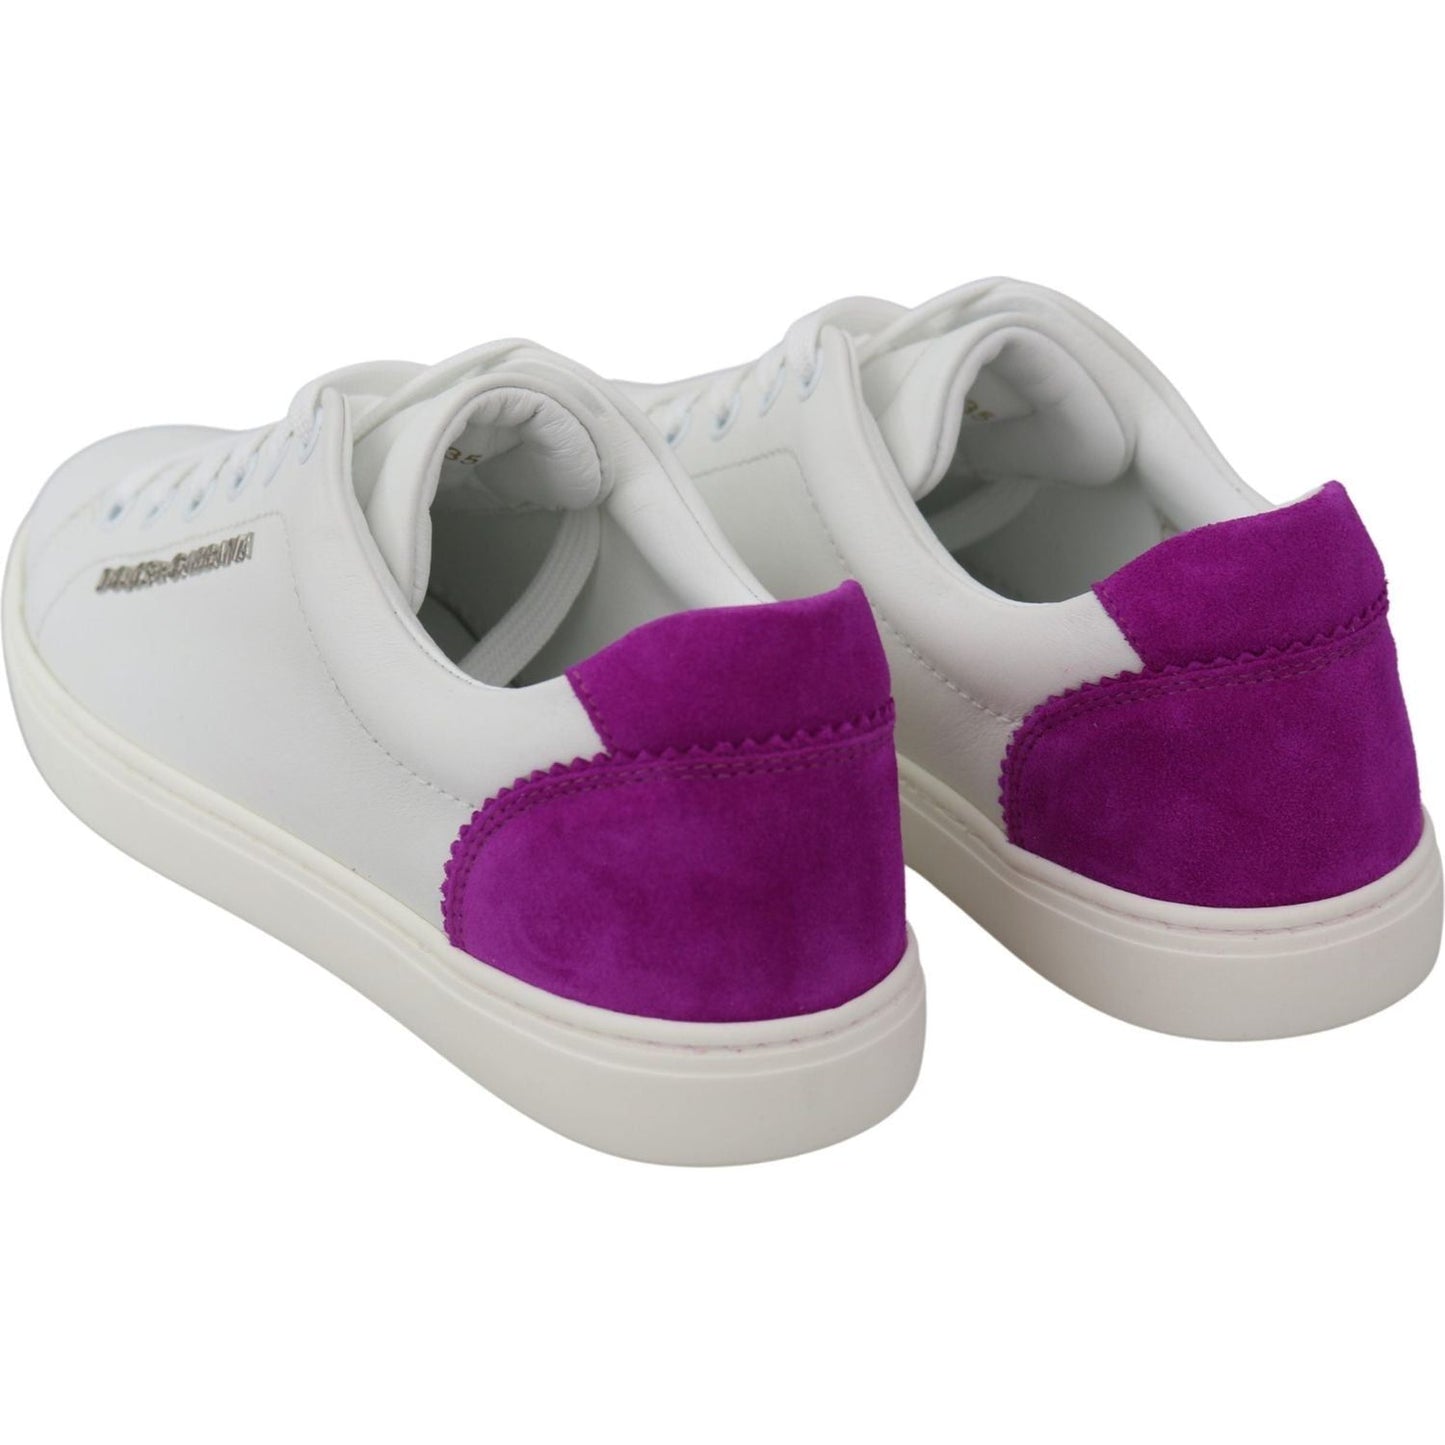 Dolce & Gabbana Chic White Leather Sneakers with Purple Accents white-purple-leather-logo-womens-shoes WOMAN SNEAKERS